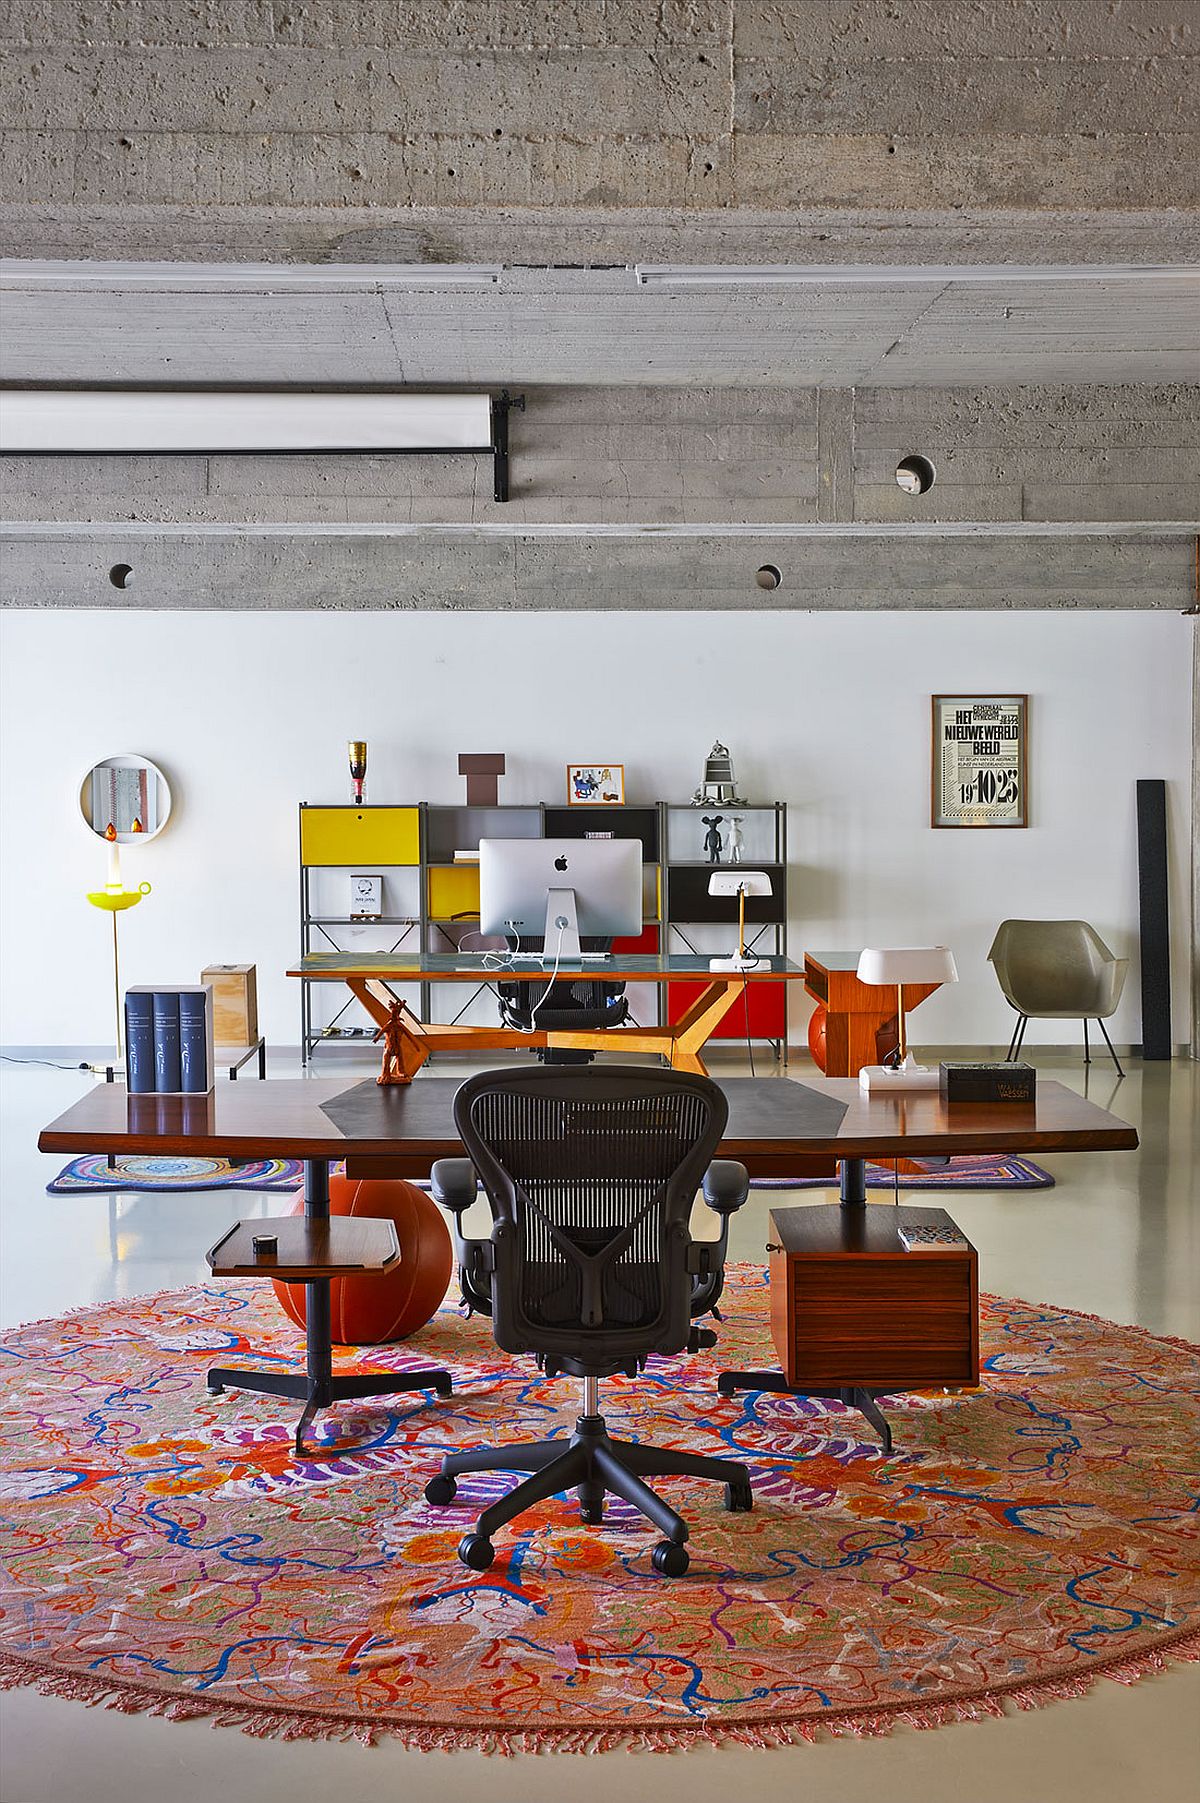 Lovely rug defines the workspace in the open area